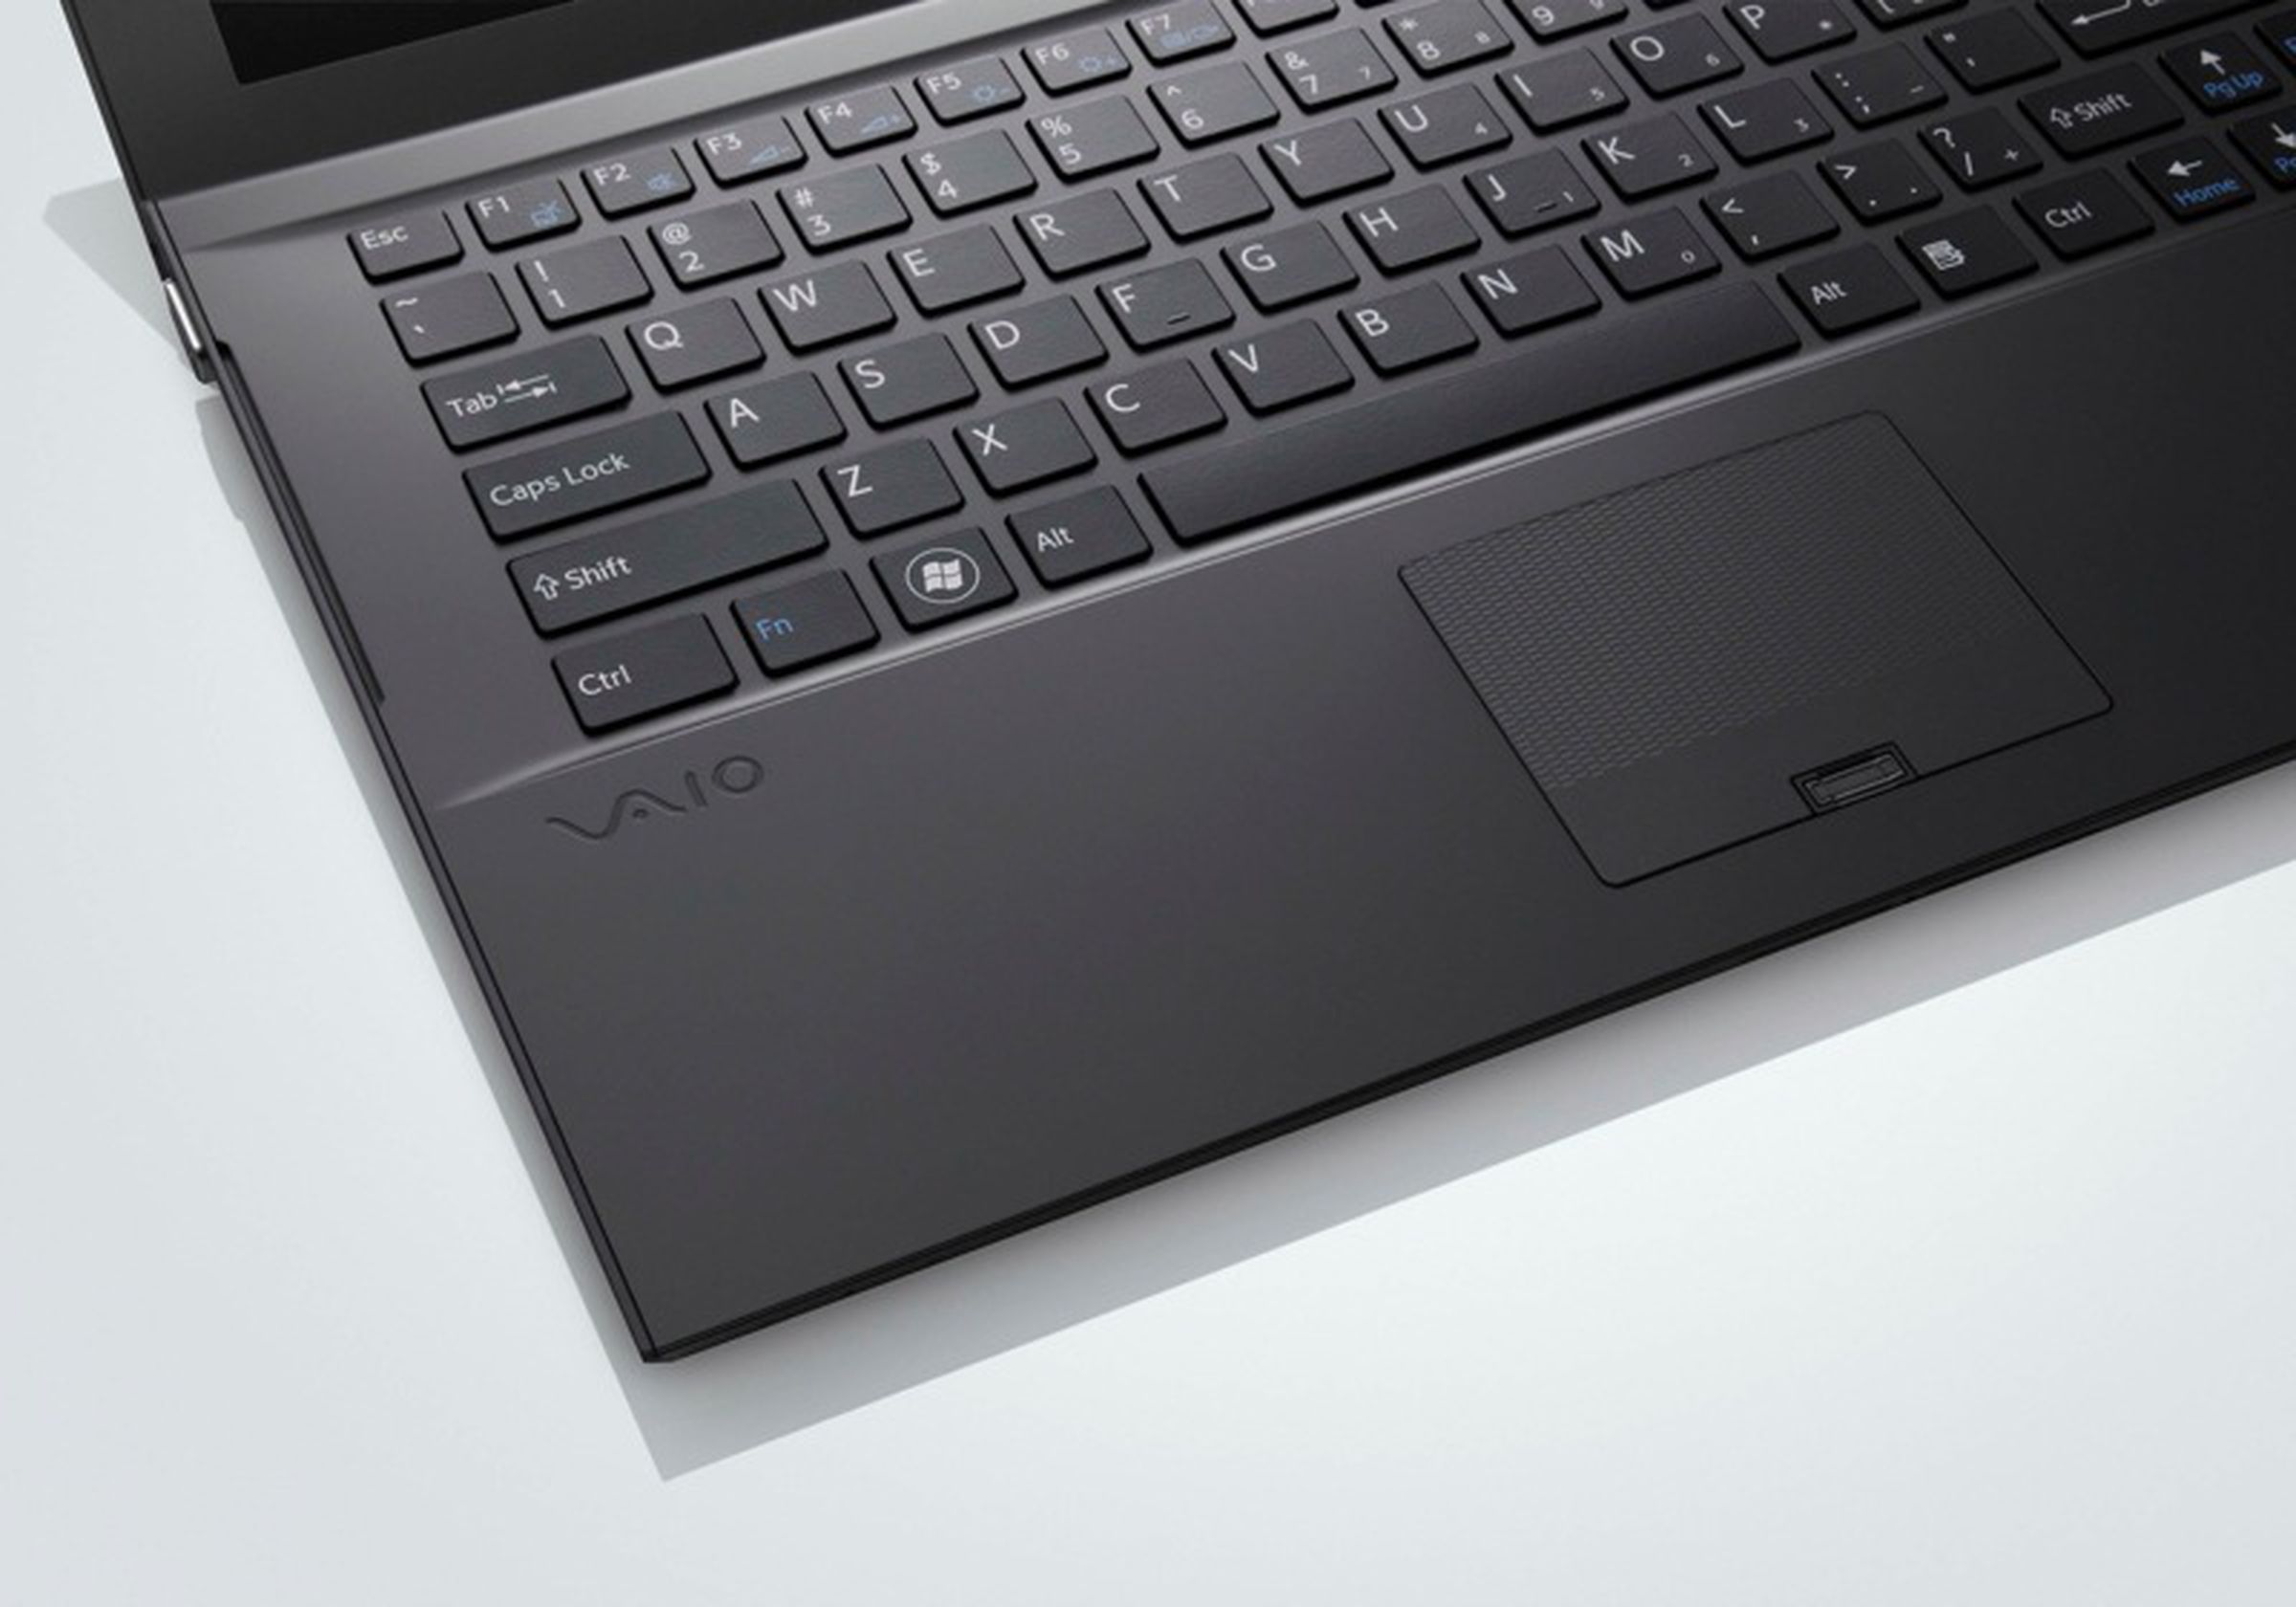 Sony Vaio Z official images